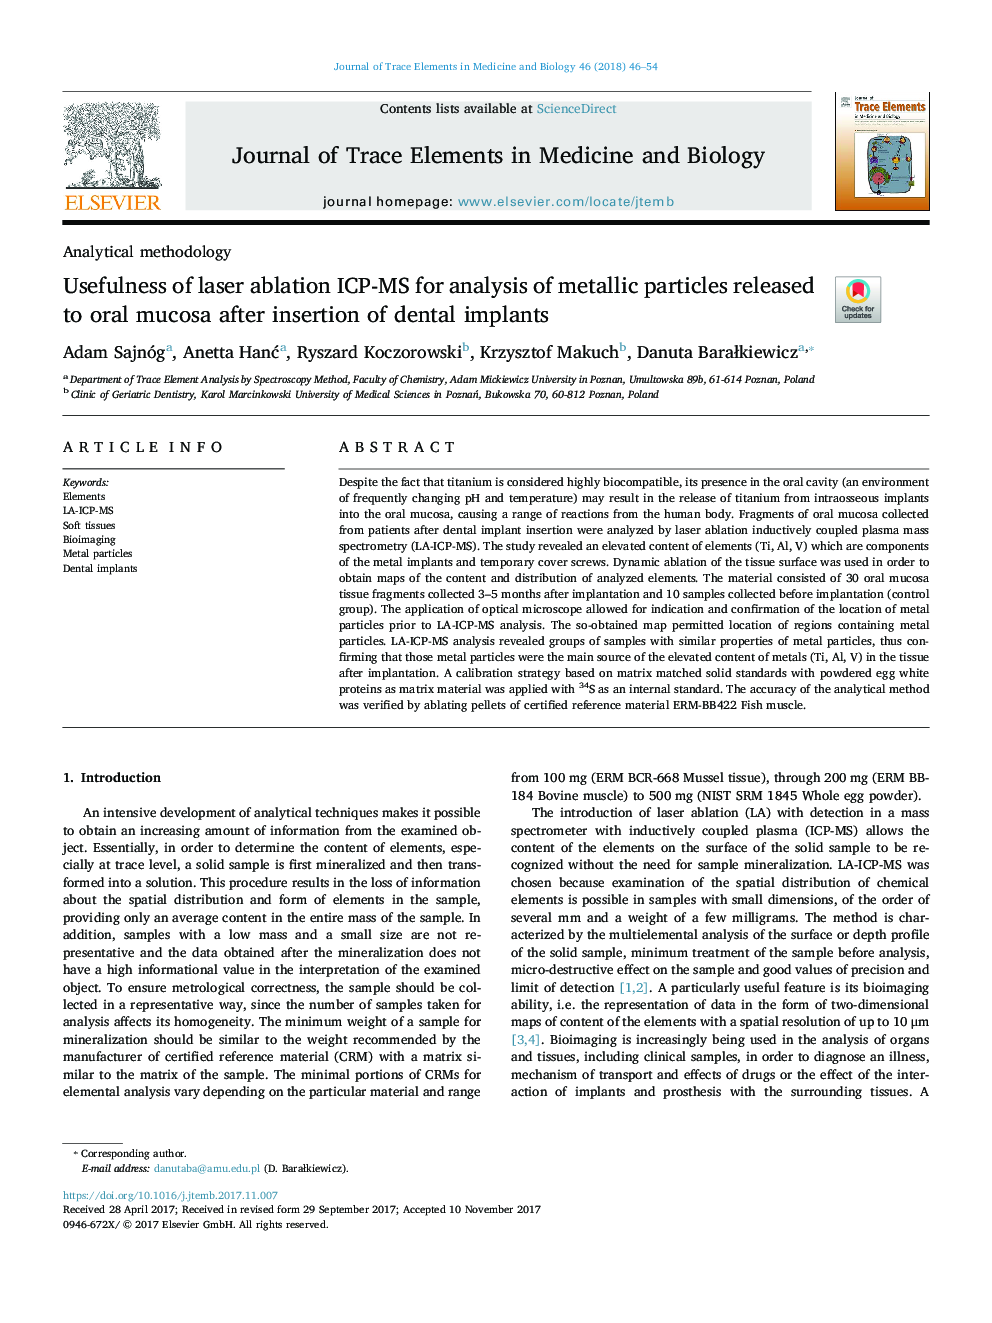 Usefulness of laser ablation ICP-MS for analysis of metallic particles released to oral mucosa after insertion of dental implants